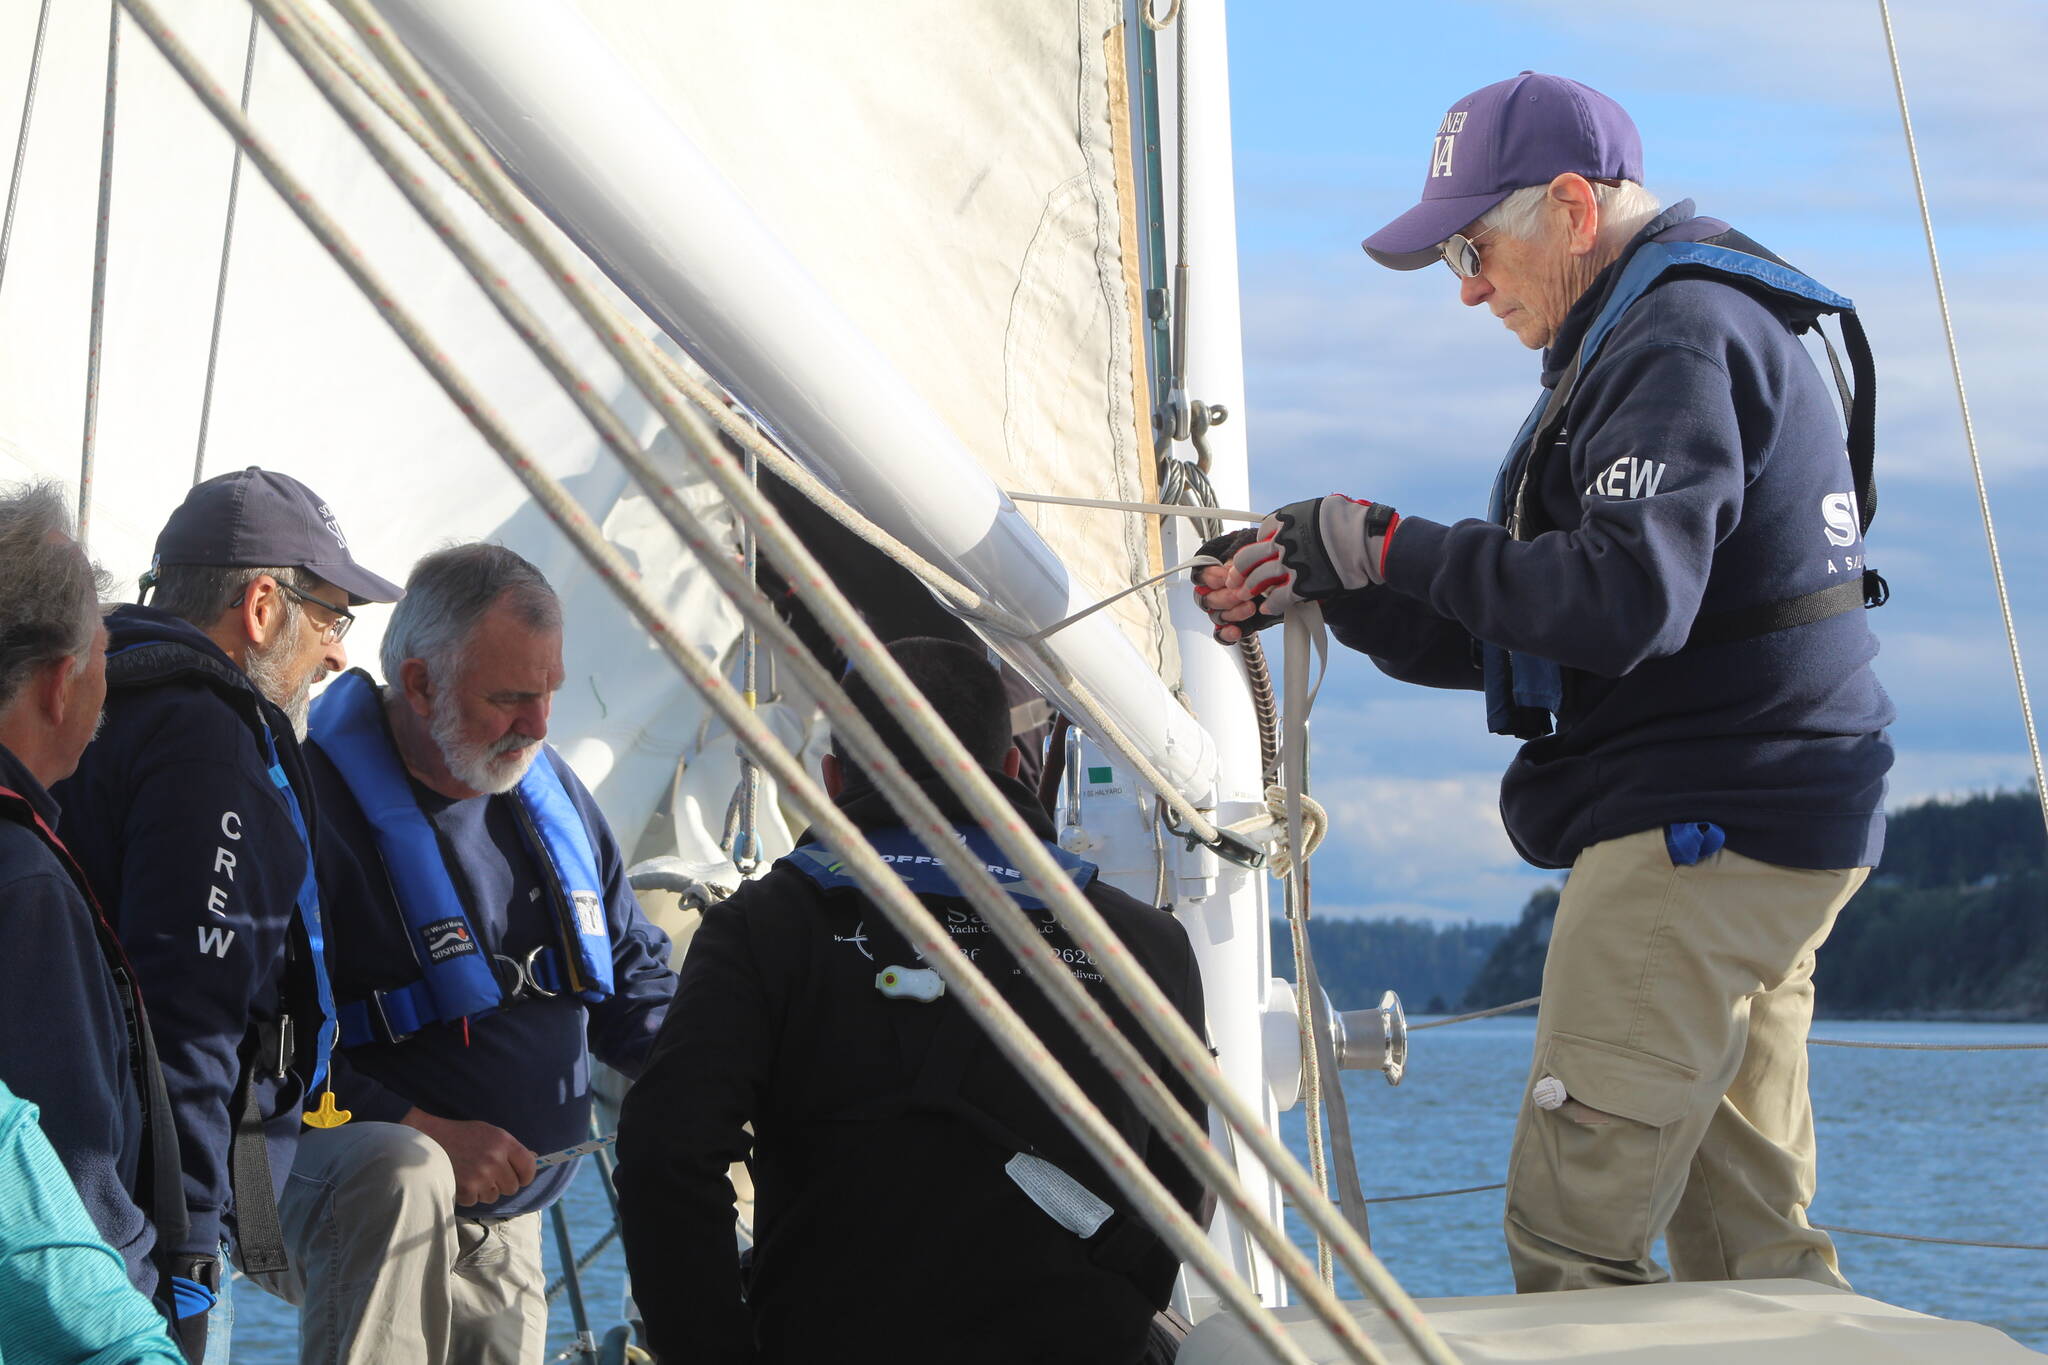 Volunteer crew members practice their various duties during a training sail on the Suva April 24. (Photo by Karina Andrew/Whidbey News-Times)